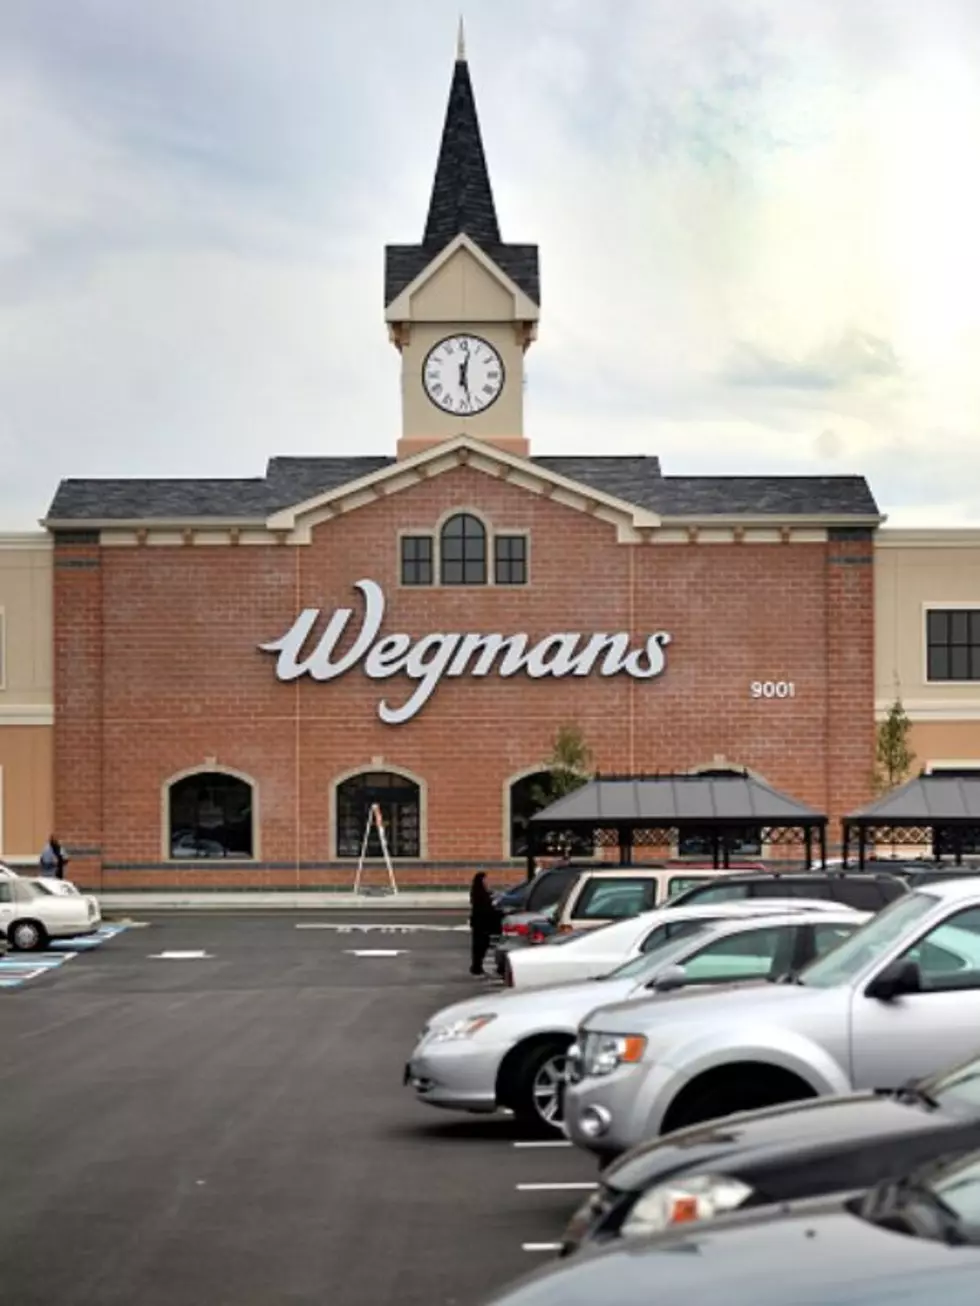 Wegmans Named Best Place To Work In Retail For Fourth Straight Year